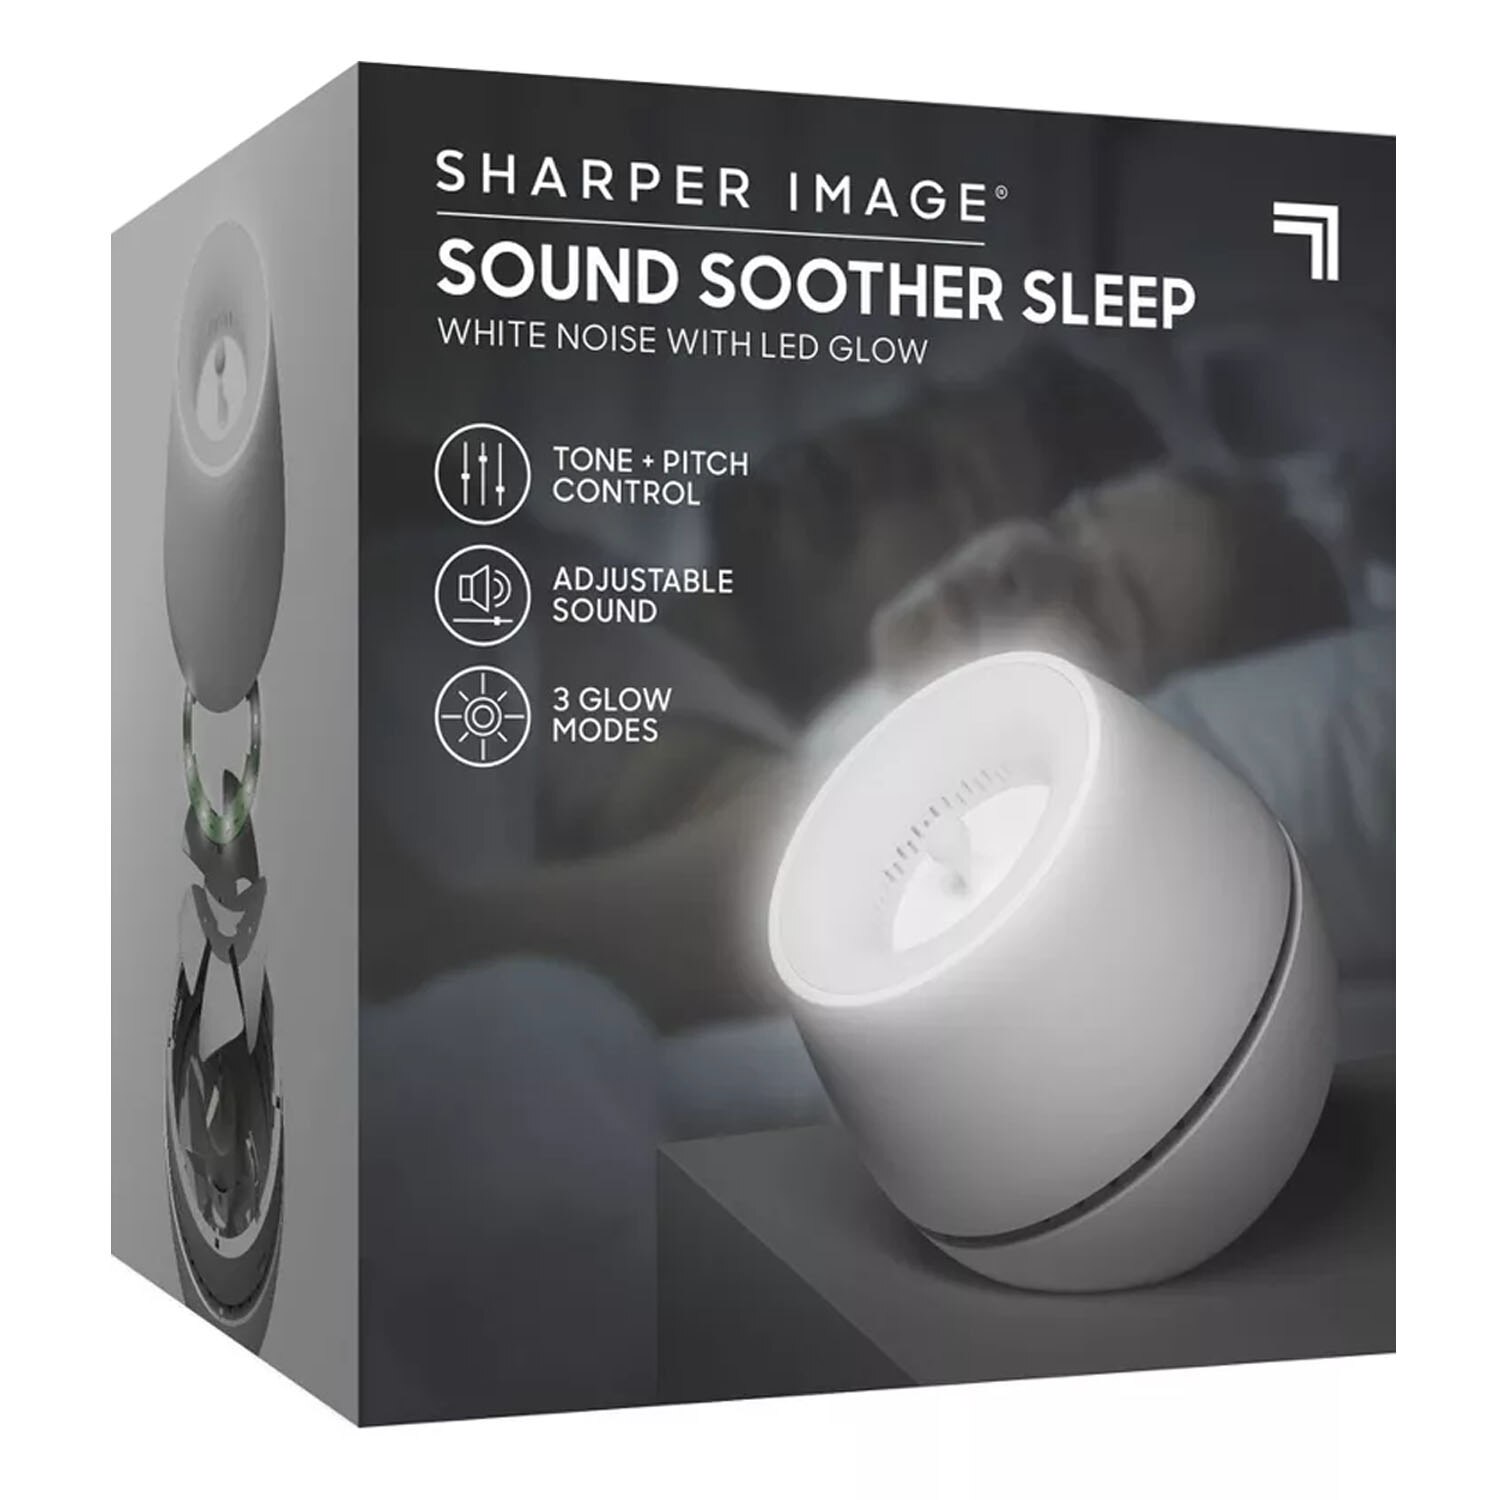 Sharper Image Sound Soother Sleep White Noise with LED Glow